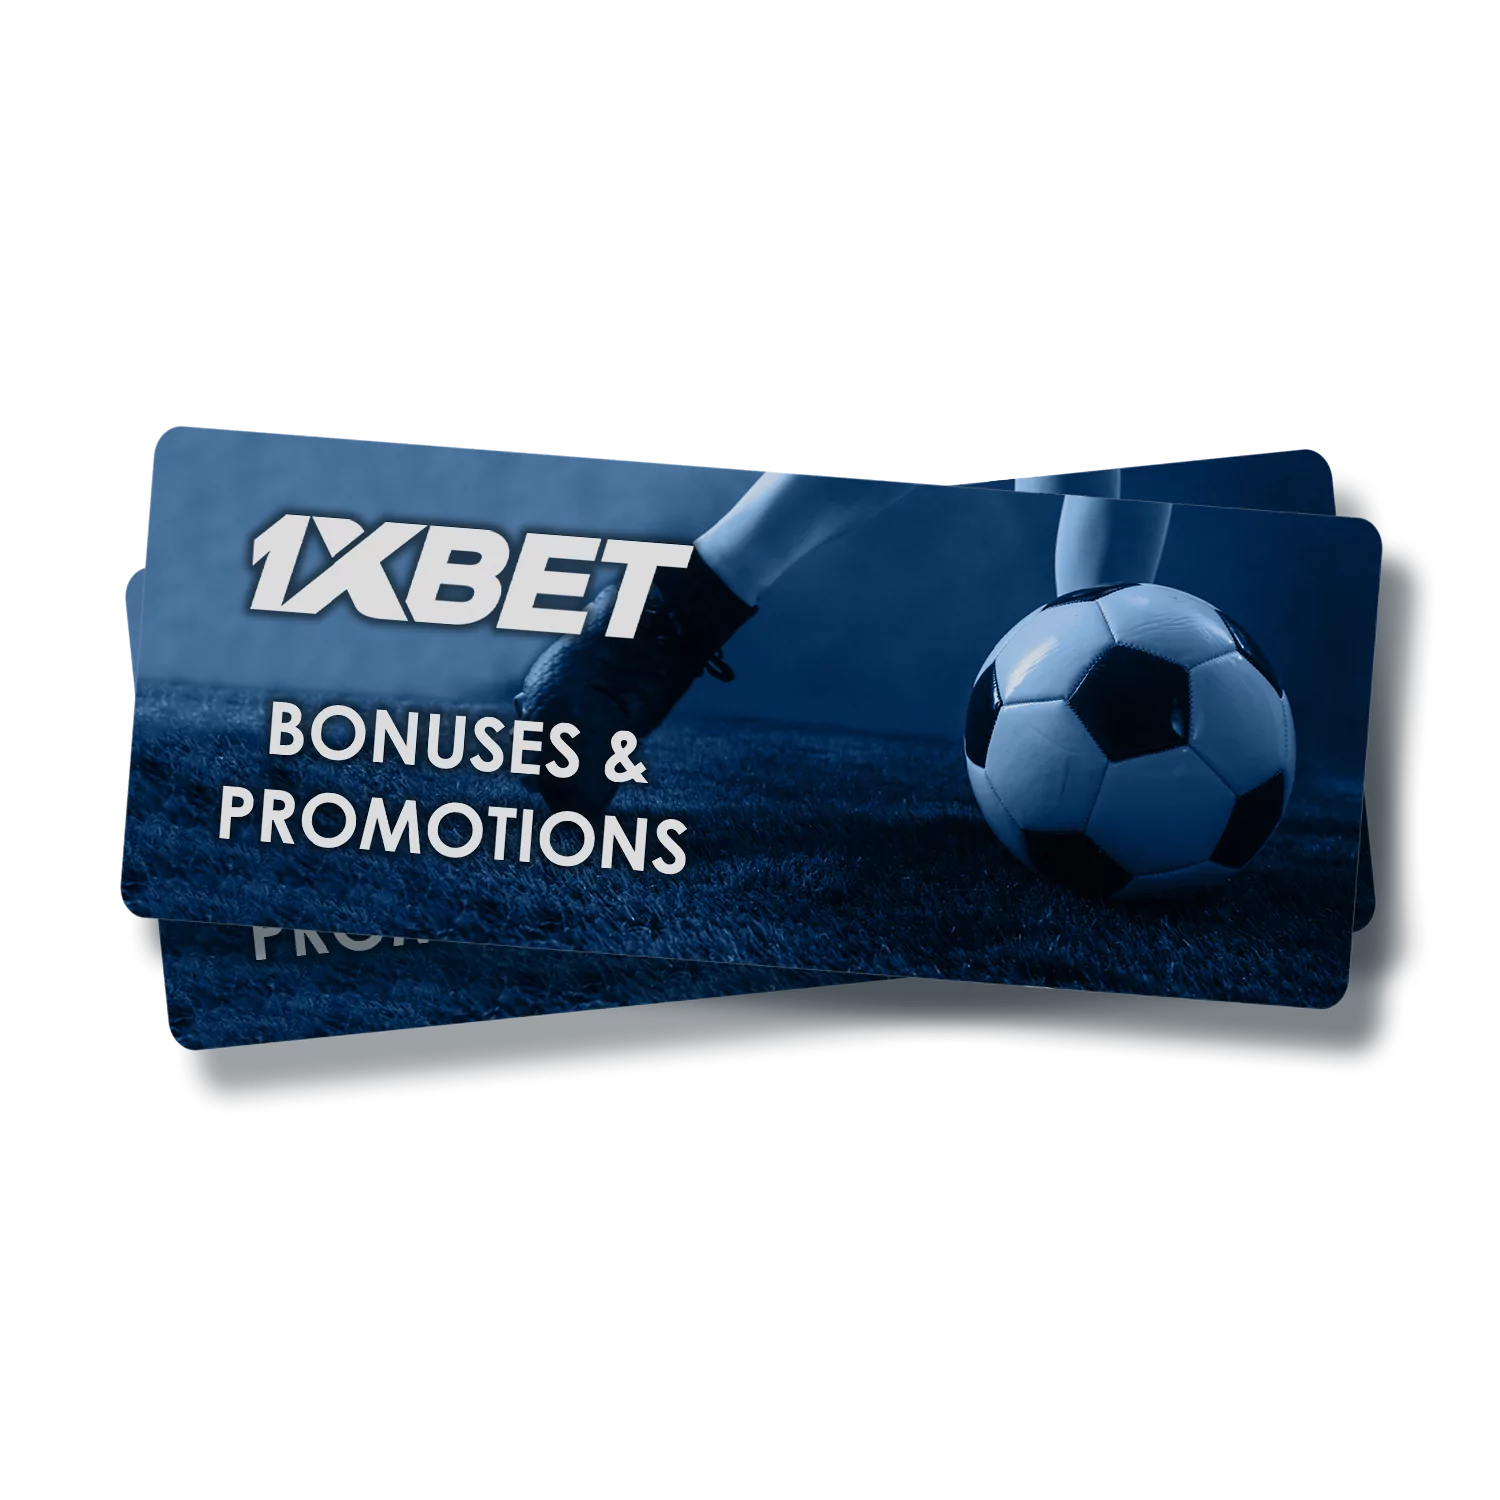 Learn what conditions you should follow to get a bonus from 1xBet.